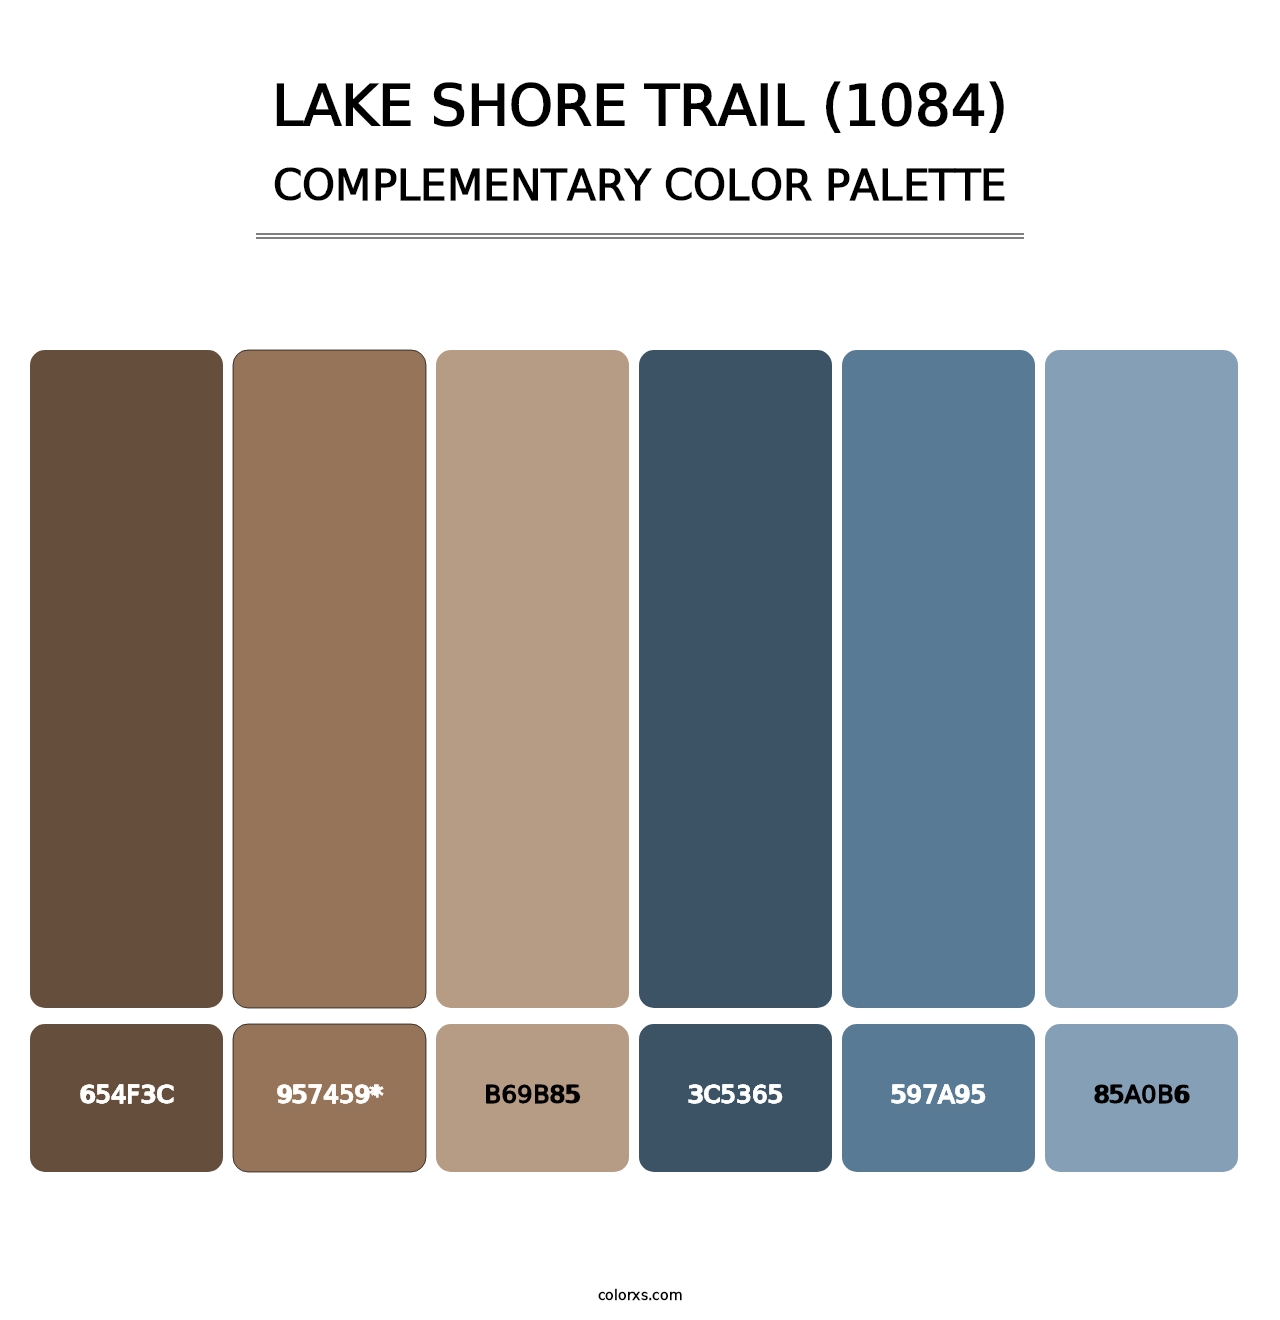 Lake Shore Trail (1084) - Complementary Color Palette